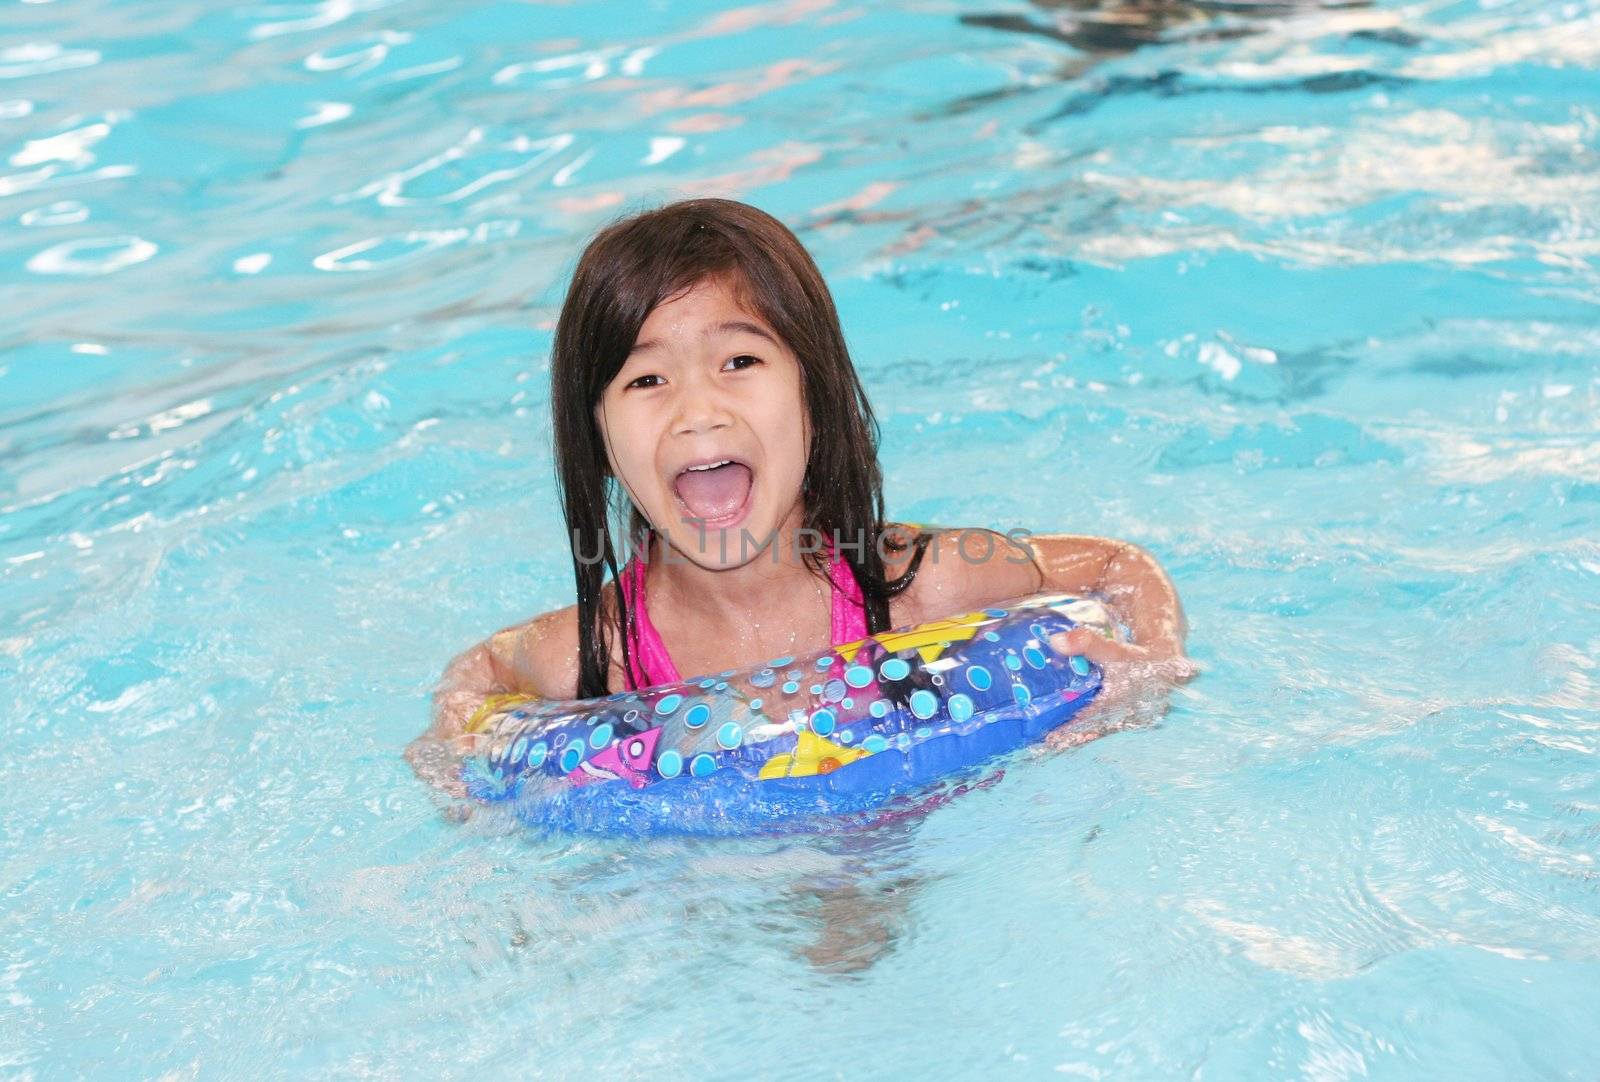 Child enjoying her swimming time in the pool.